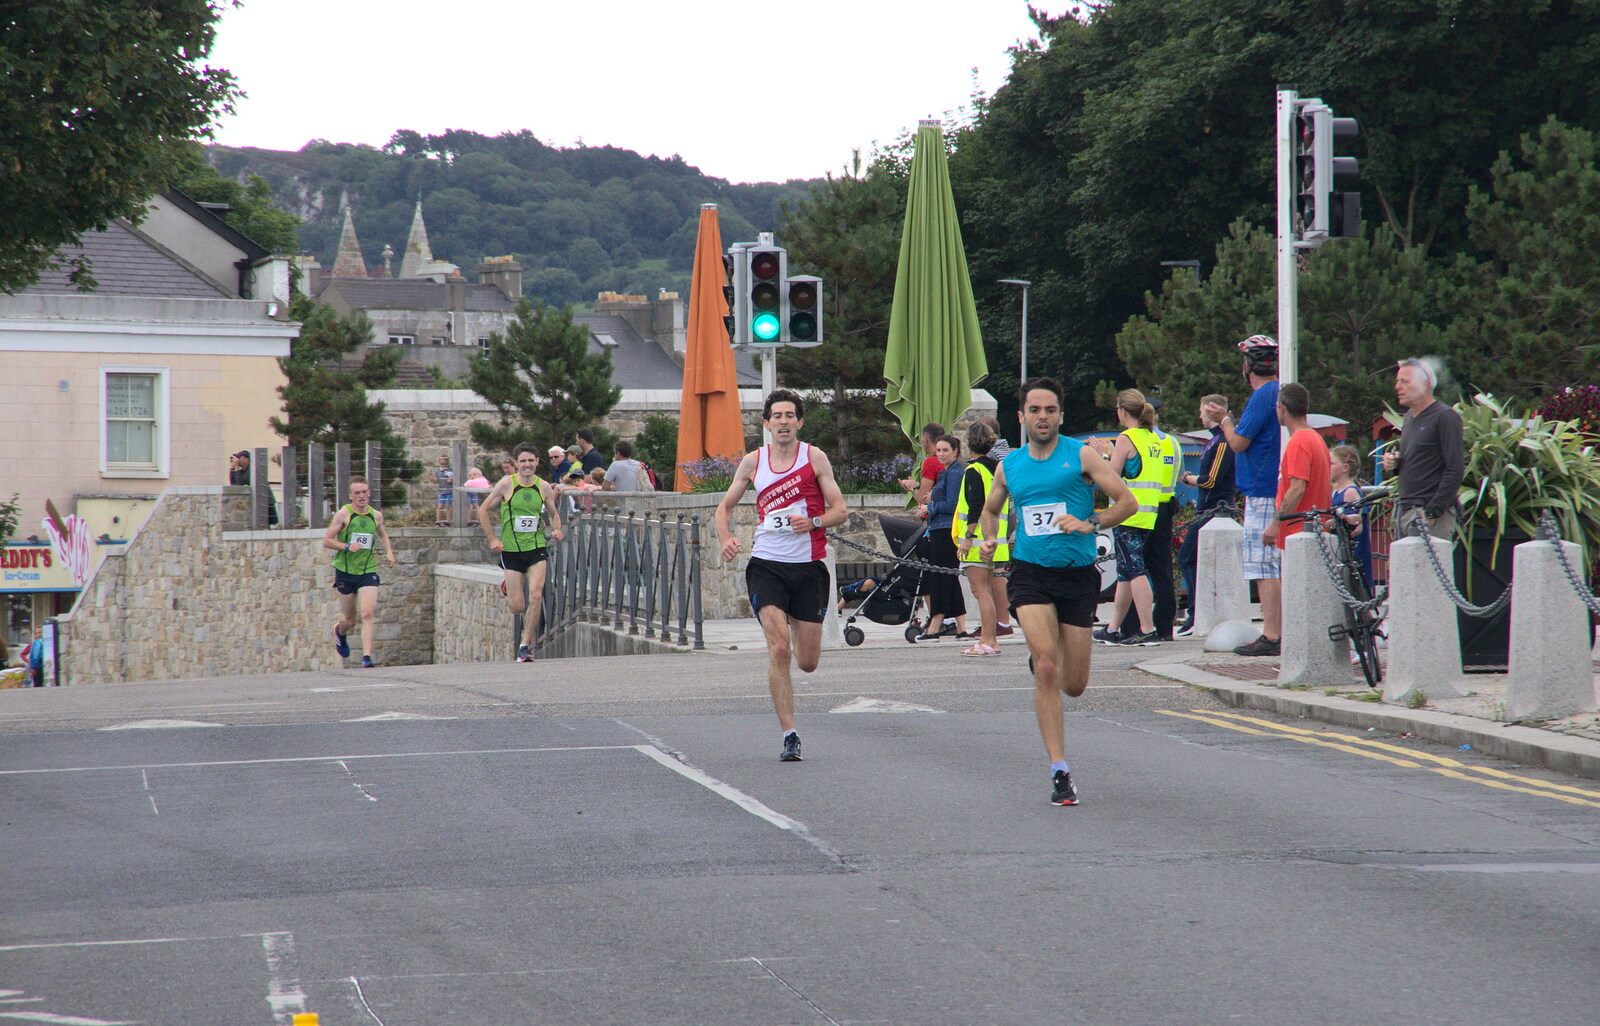 More runners come up the hill from The Dún Laoghaire 10k Run, County Dublin, Ireland - 6th August 2018